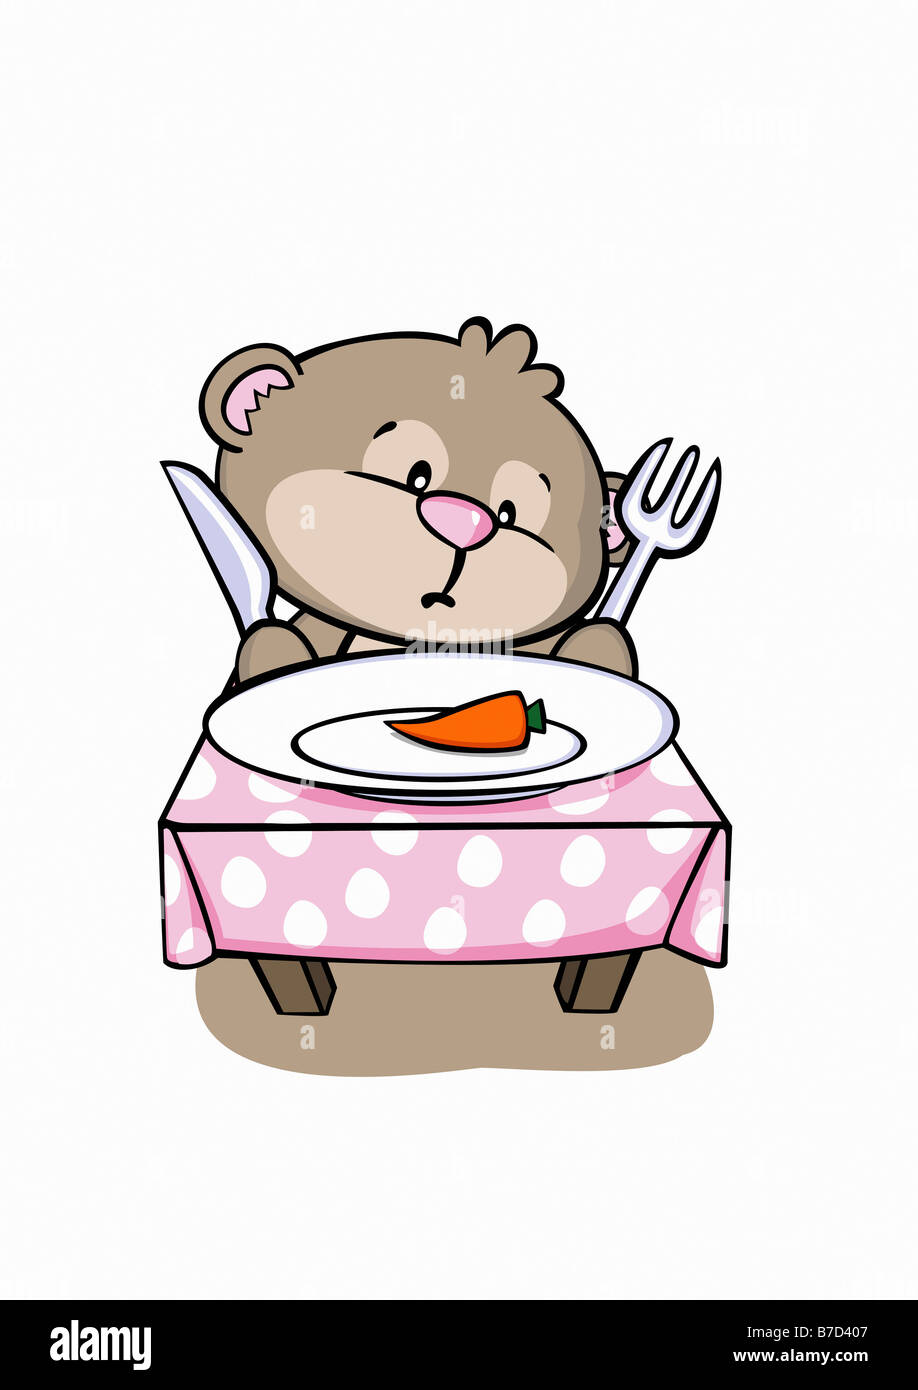 A cartoon bear sitting at a table and eating dinner Stock Photo - Alamy